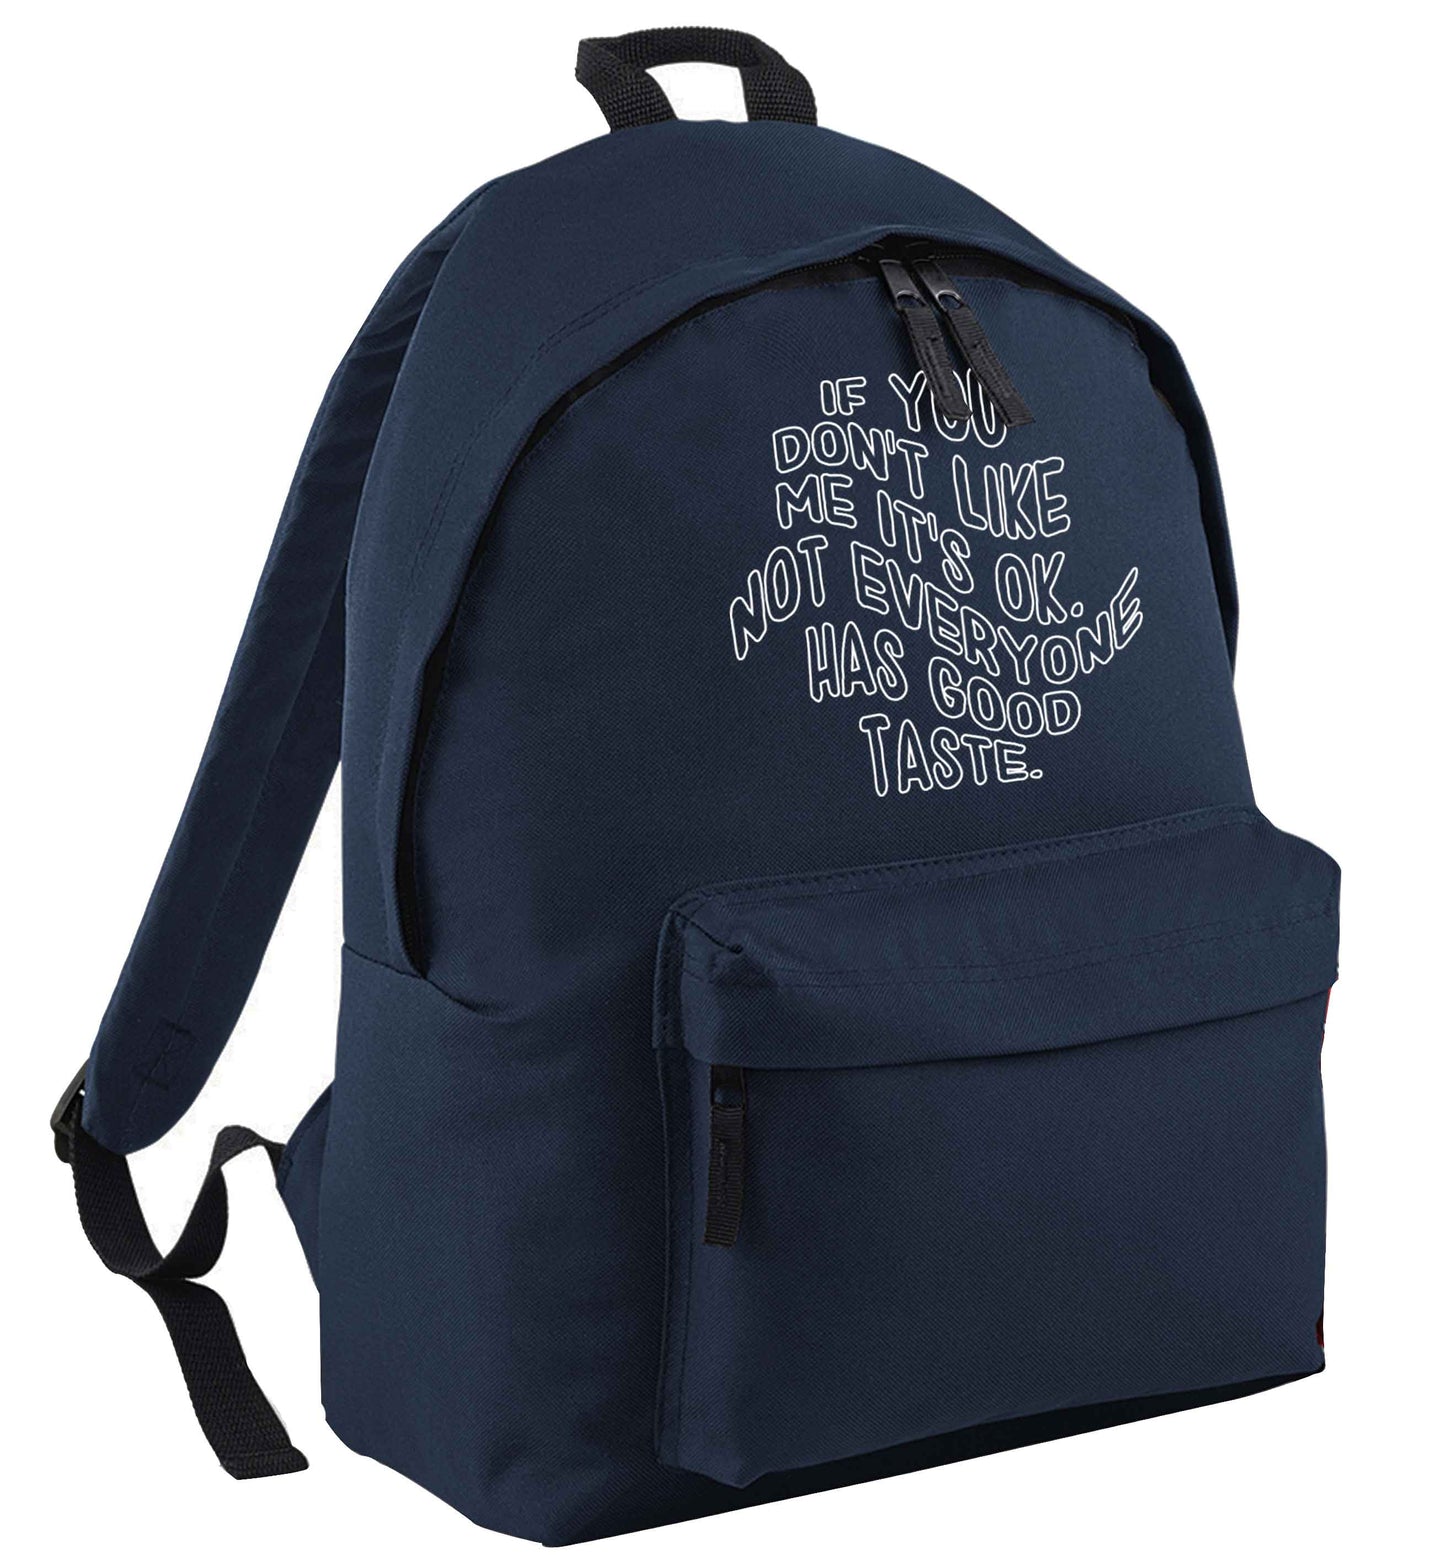 If you don't like me it's ok not everyone has good taste navy adults backpack